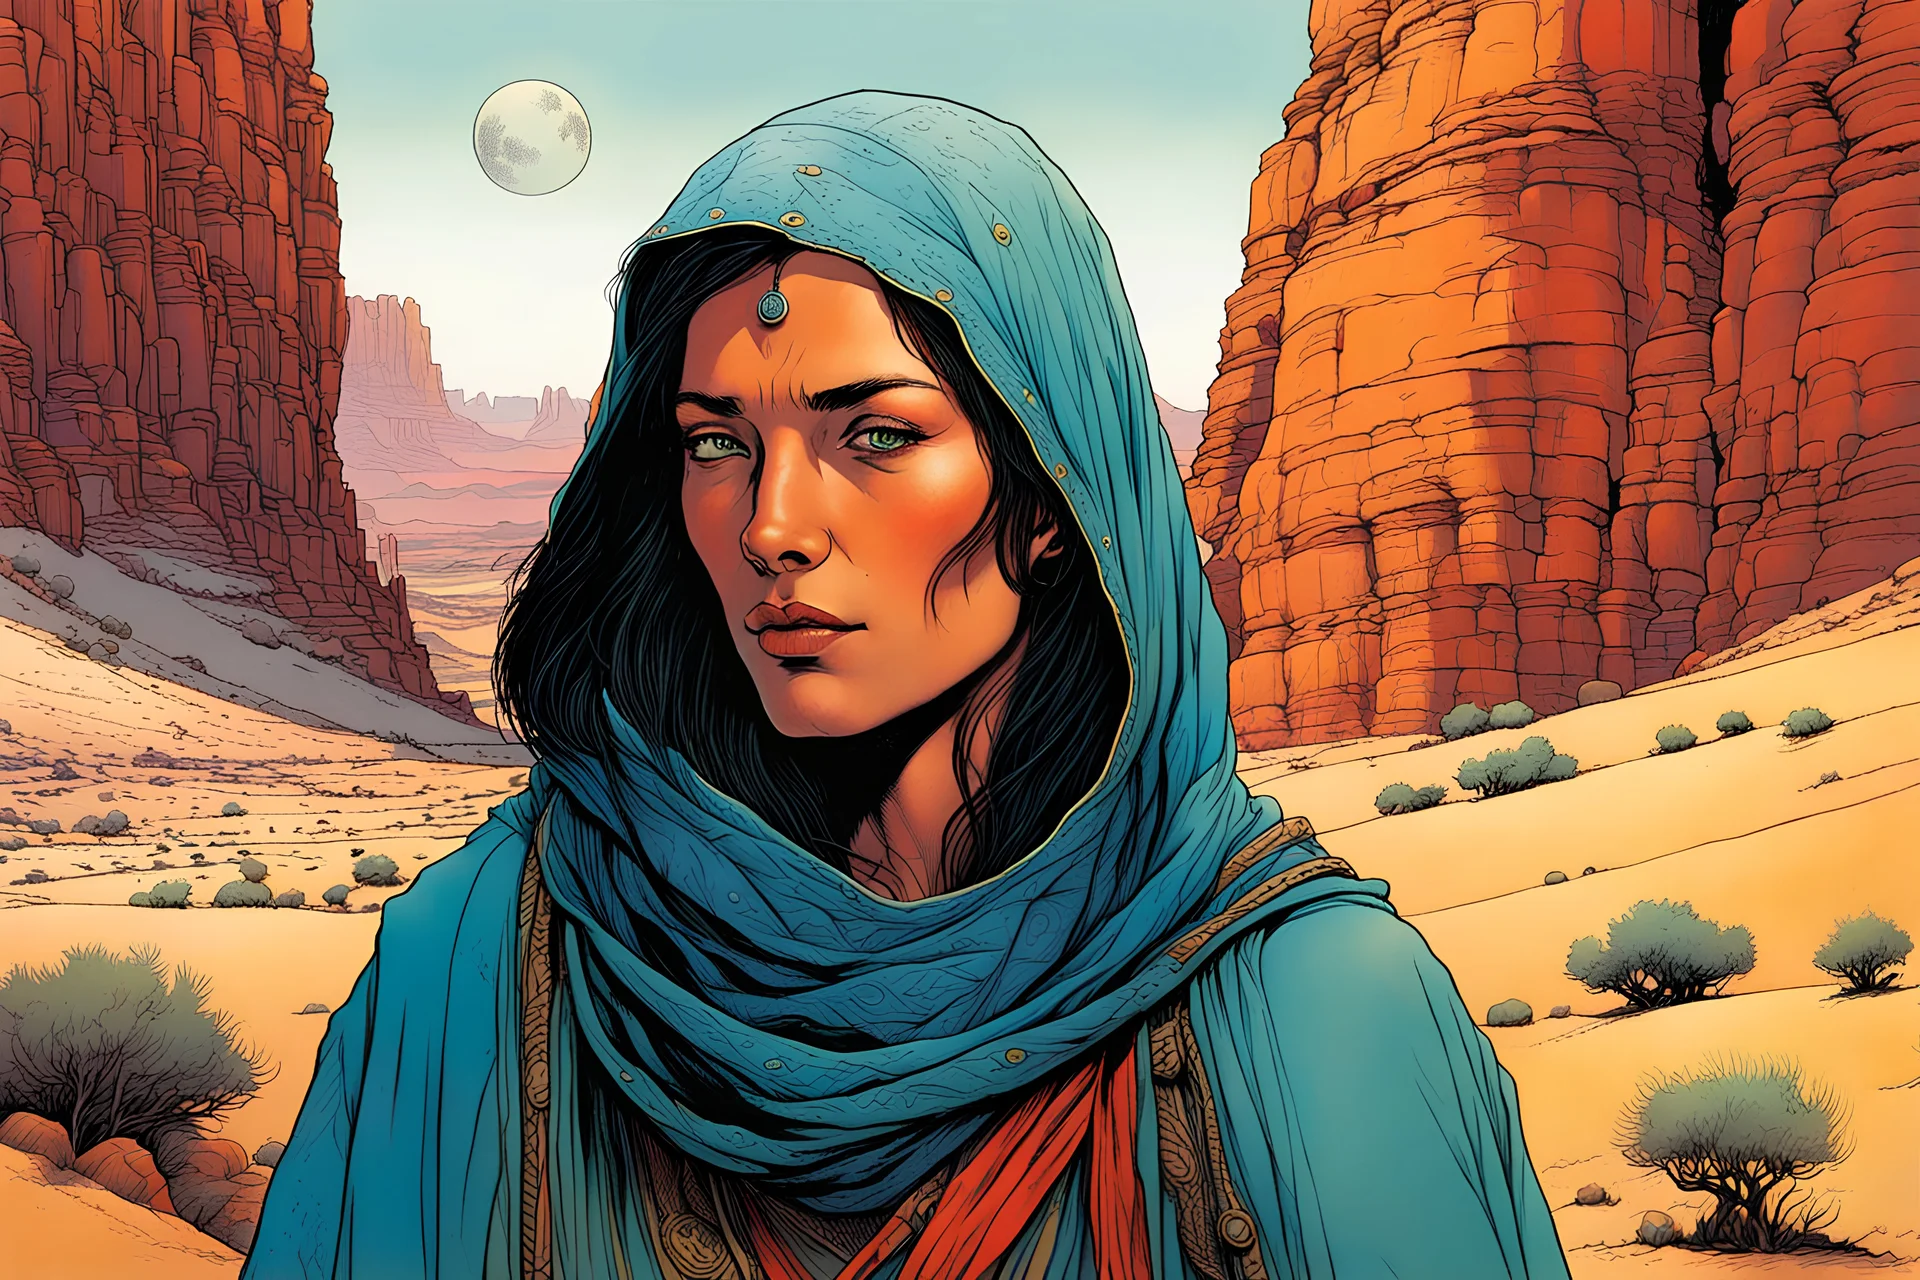 create an portrait of a nomadic shepherdess with highly detailed, delicate feminine facial features, inhabiting an ethereal desert canyon land in the comic book style of Jean Giraud Moebius, David Hoskins, and Enki Bilal, precisely drawn, boldly inked, with vibrant colors